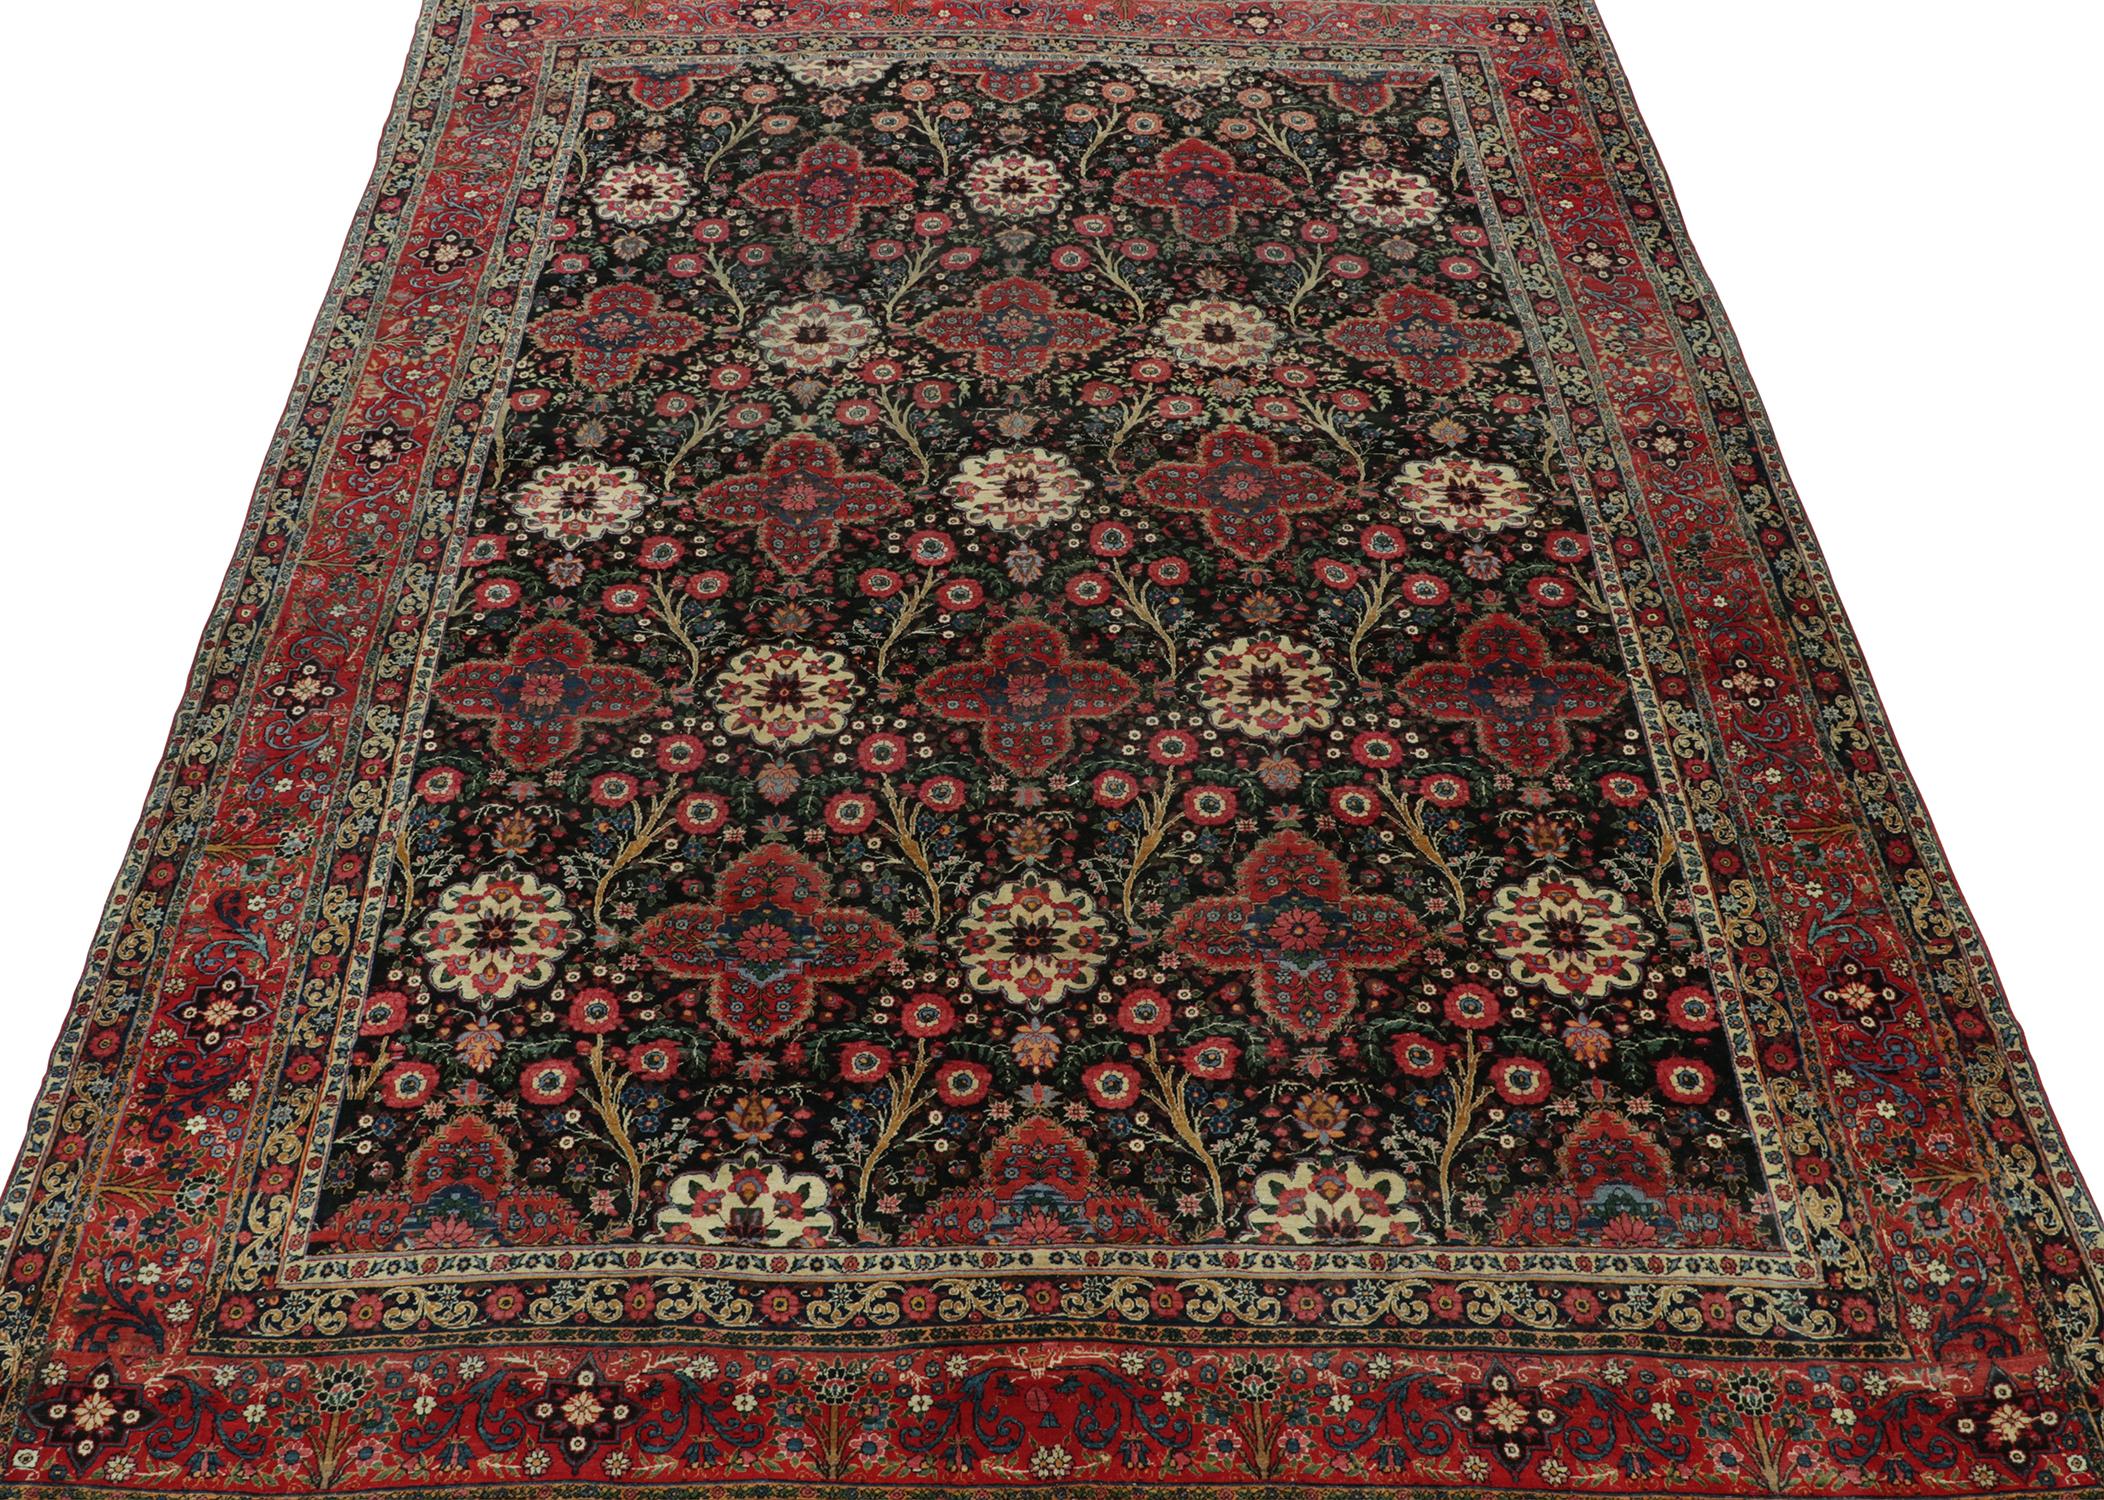 An antique 10x15 Persian rug from Tehran, hand-knotted in wool circa 1920s.

Further On the Design:

This antique piece is a royal selection that enjoys an all over floral design in blue, red and off-white on a bold black field. Keen eyes will